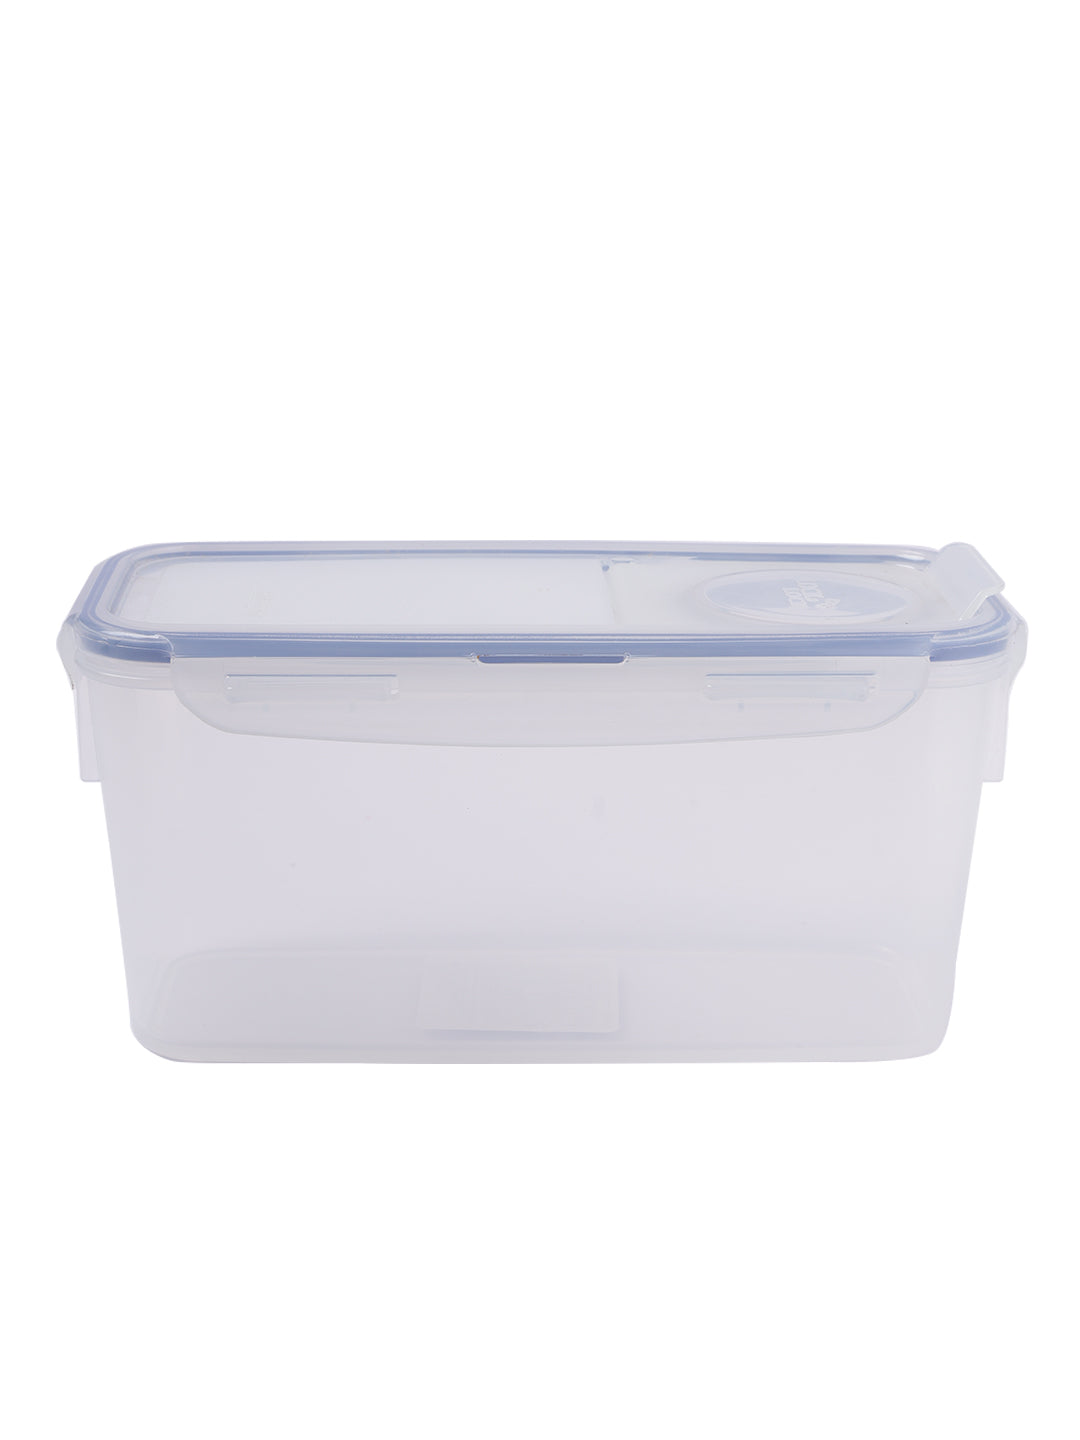 FLIP LID CONTAINER - 1.5LTR